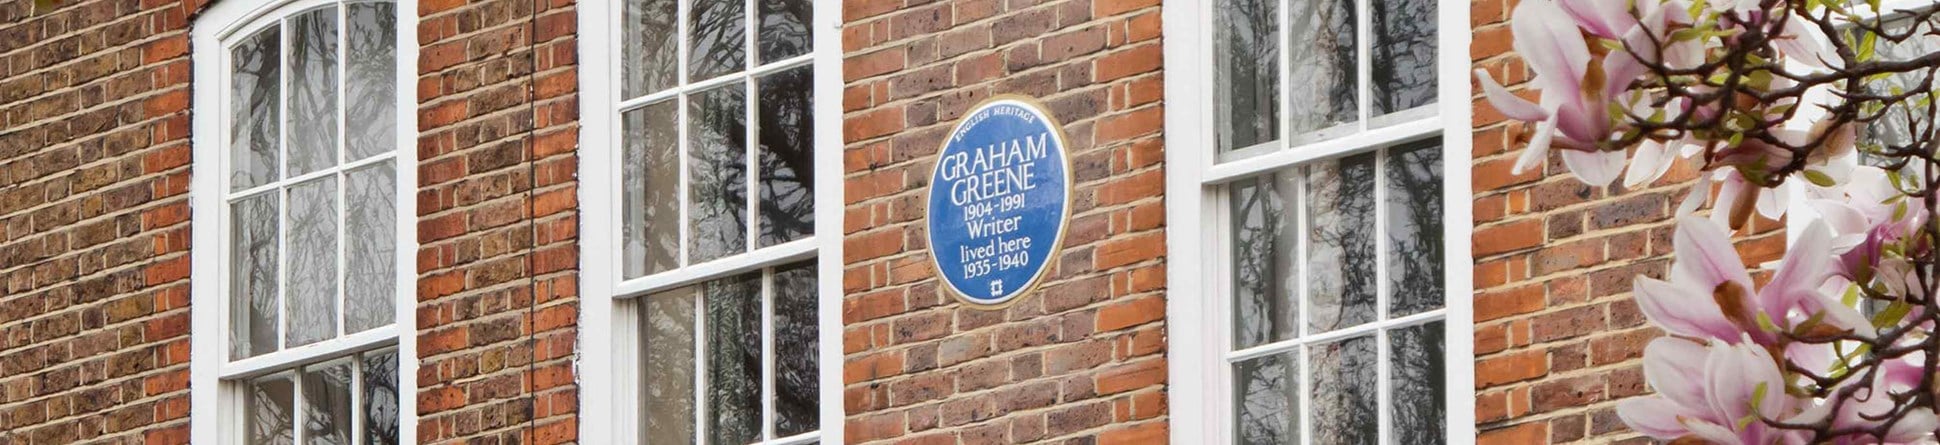 Close-up of a blue heritage plaque between large windows on a red brick wall. Tree foliage frames the image on the far left and far right.